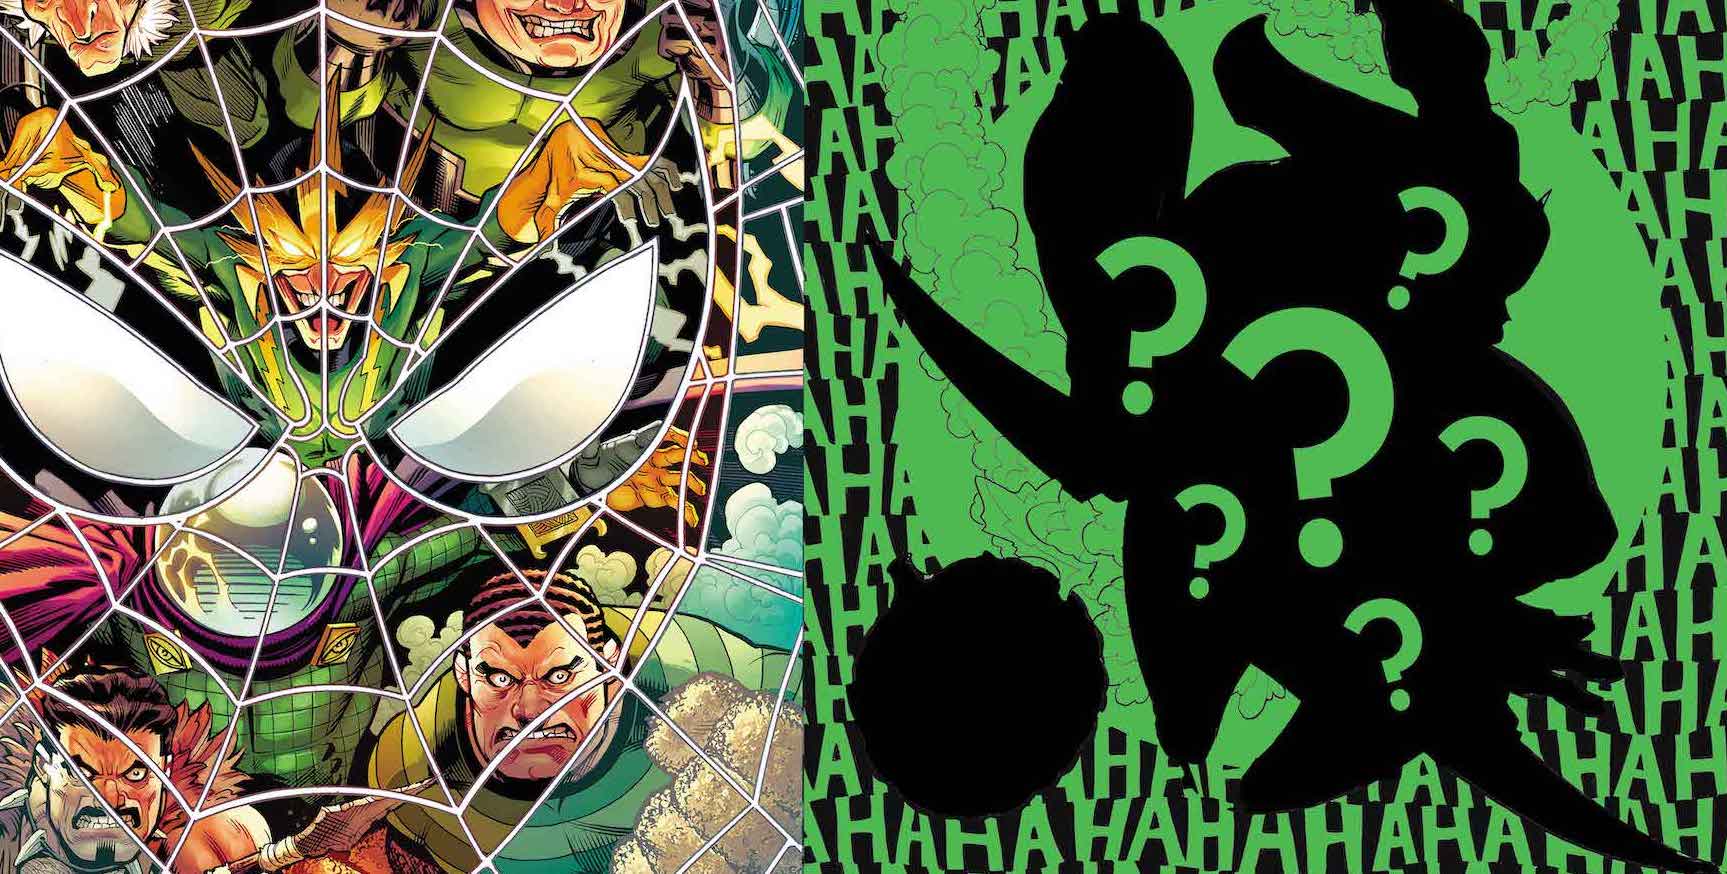 New Goblin to be born in 'Amazing Spider-Man' #51 and #52